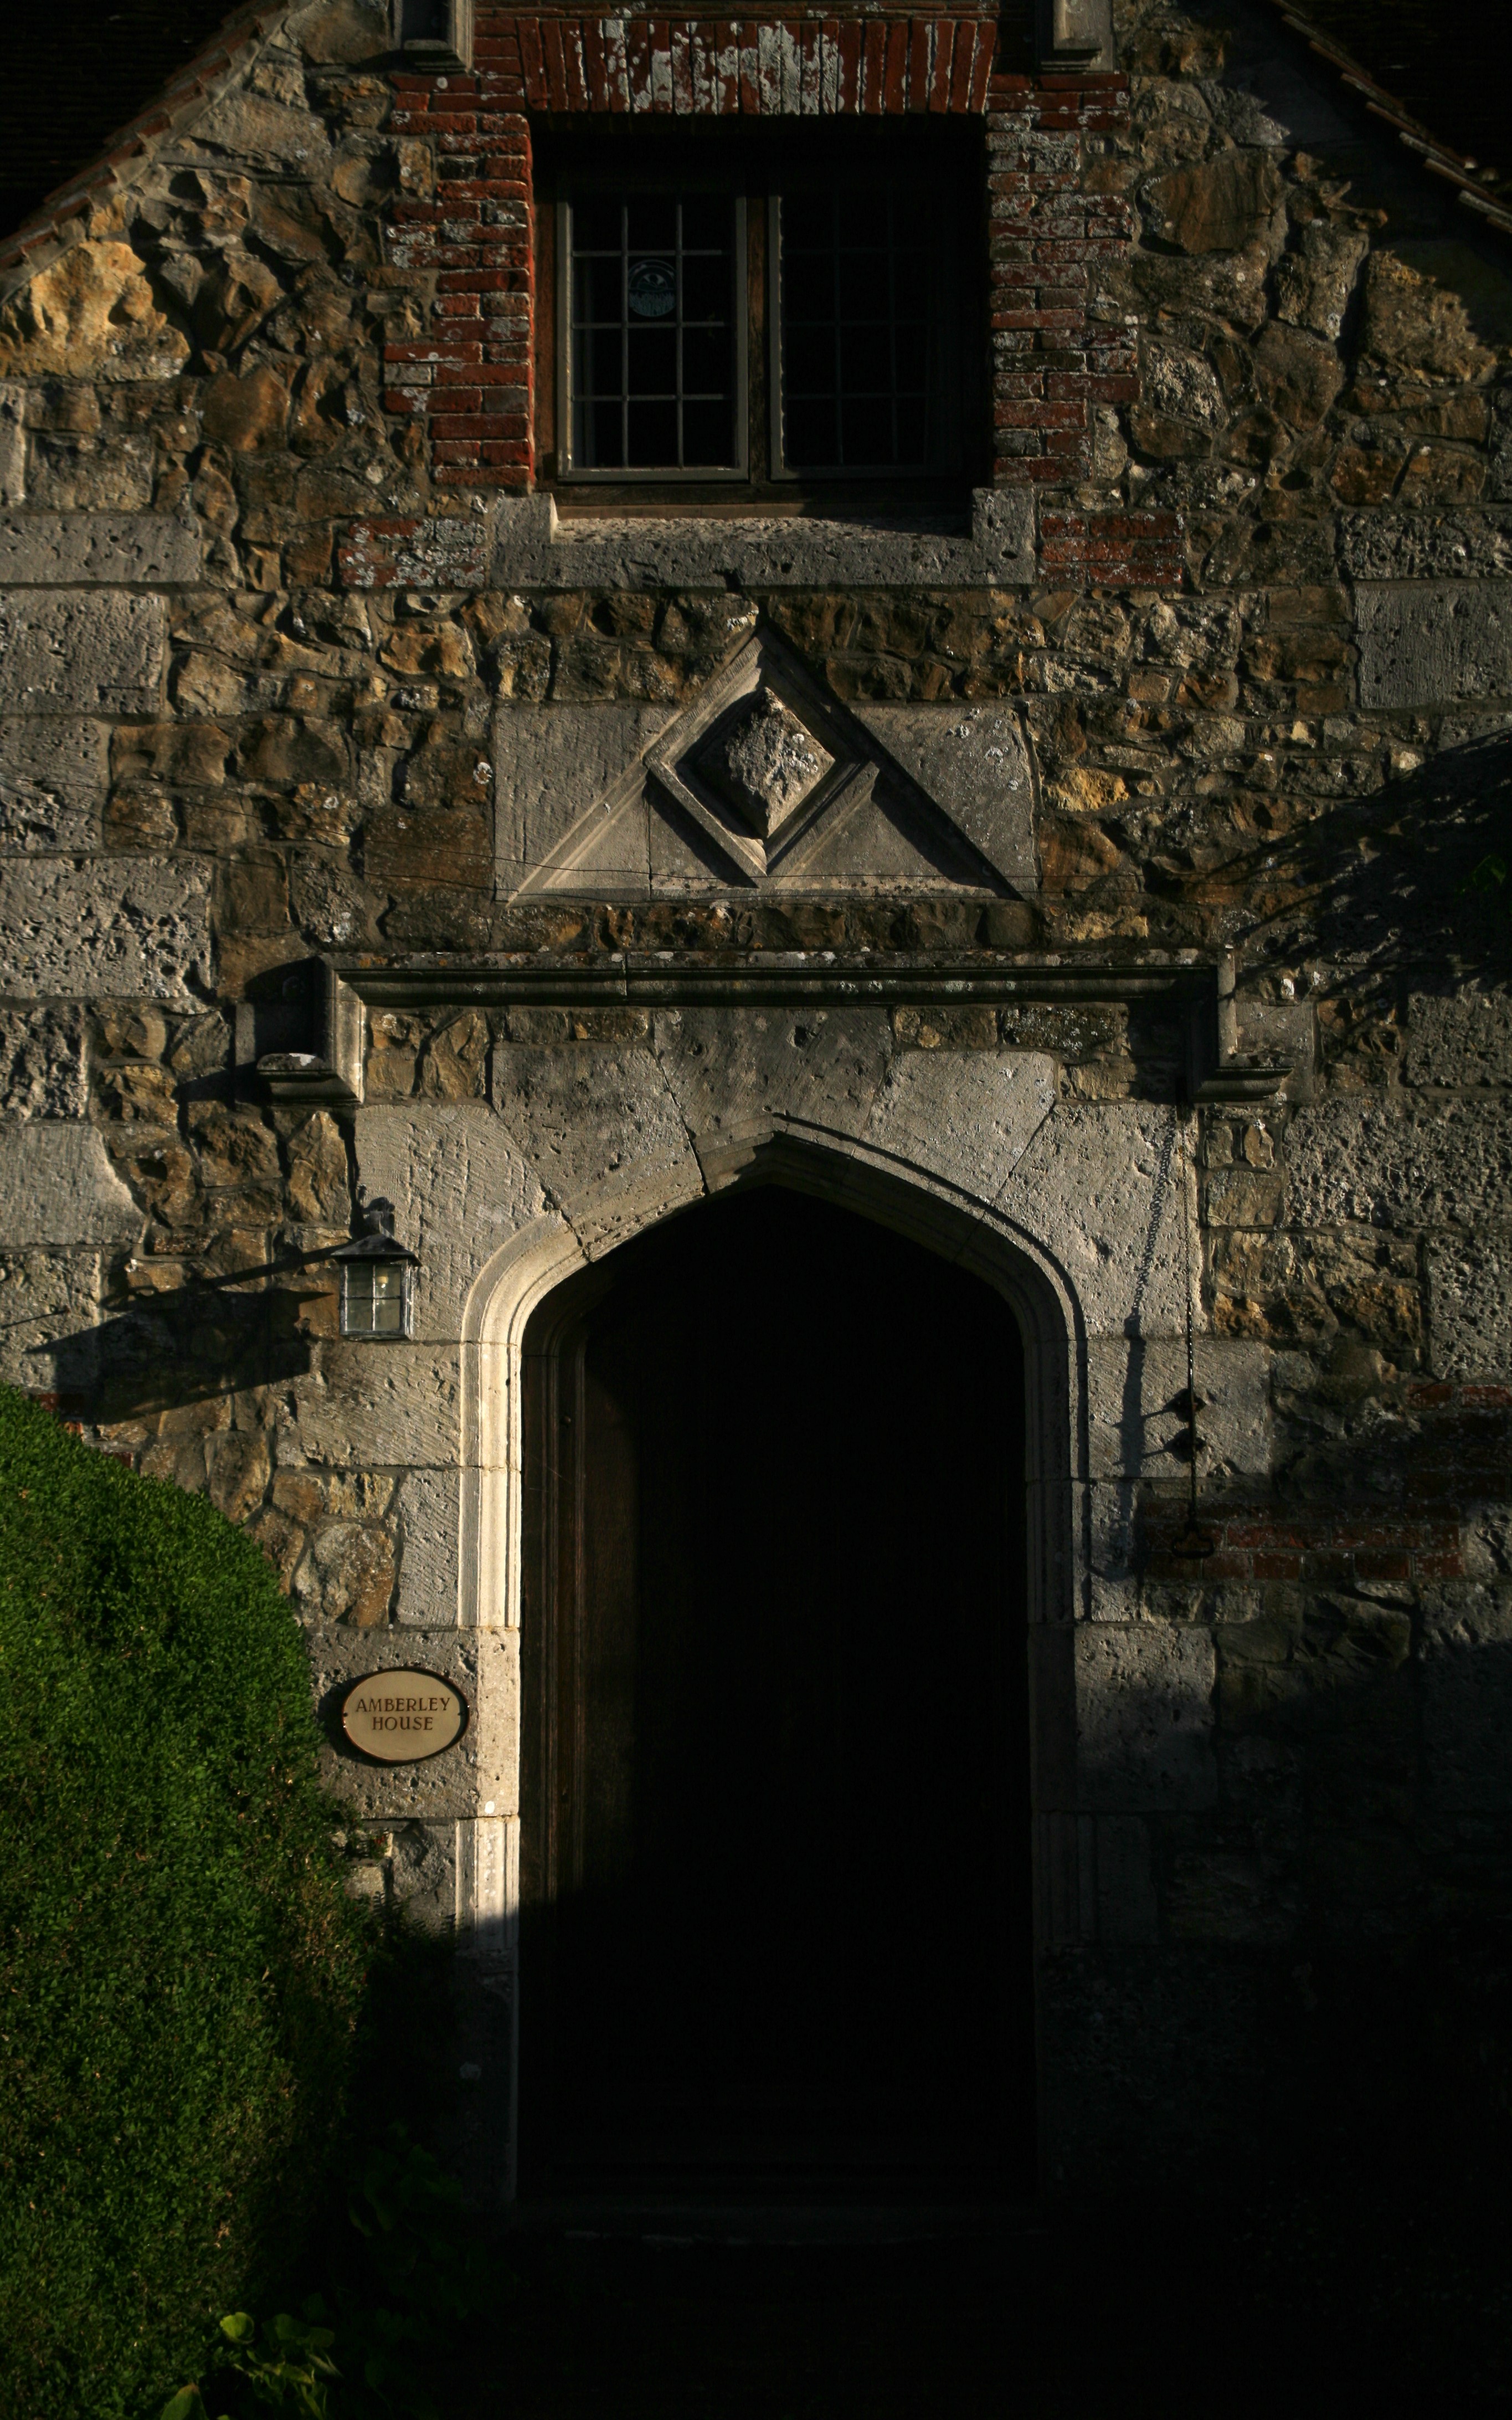 The ornate stone entryway of an old cottage